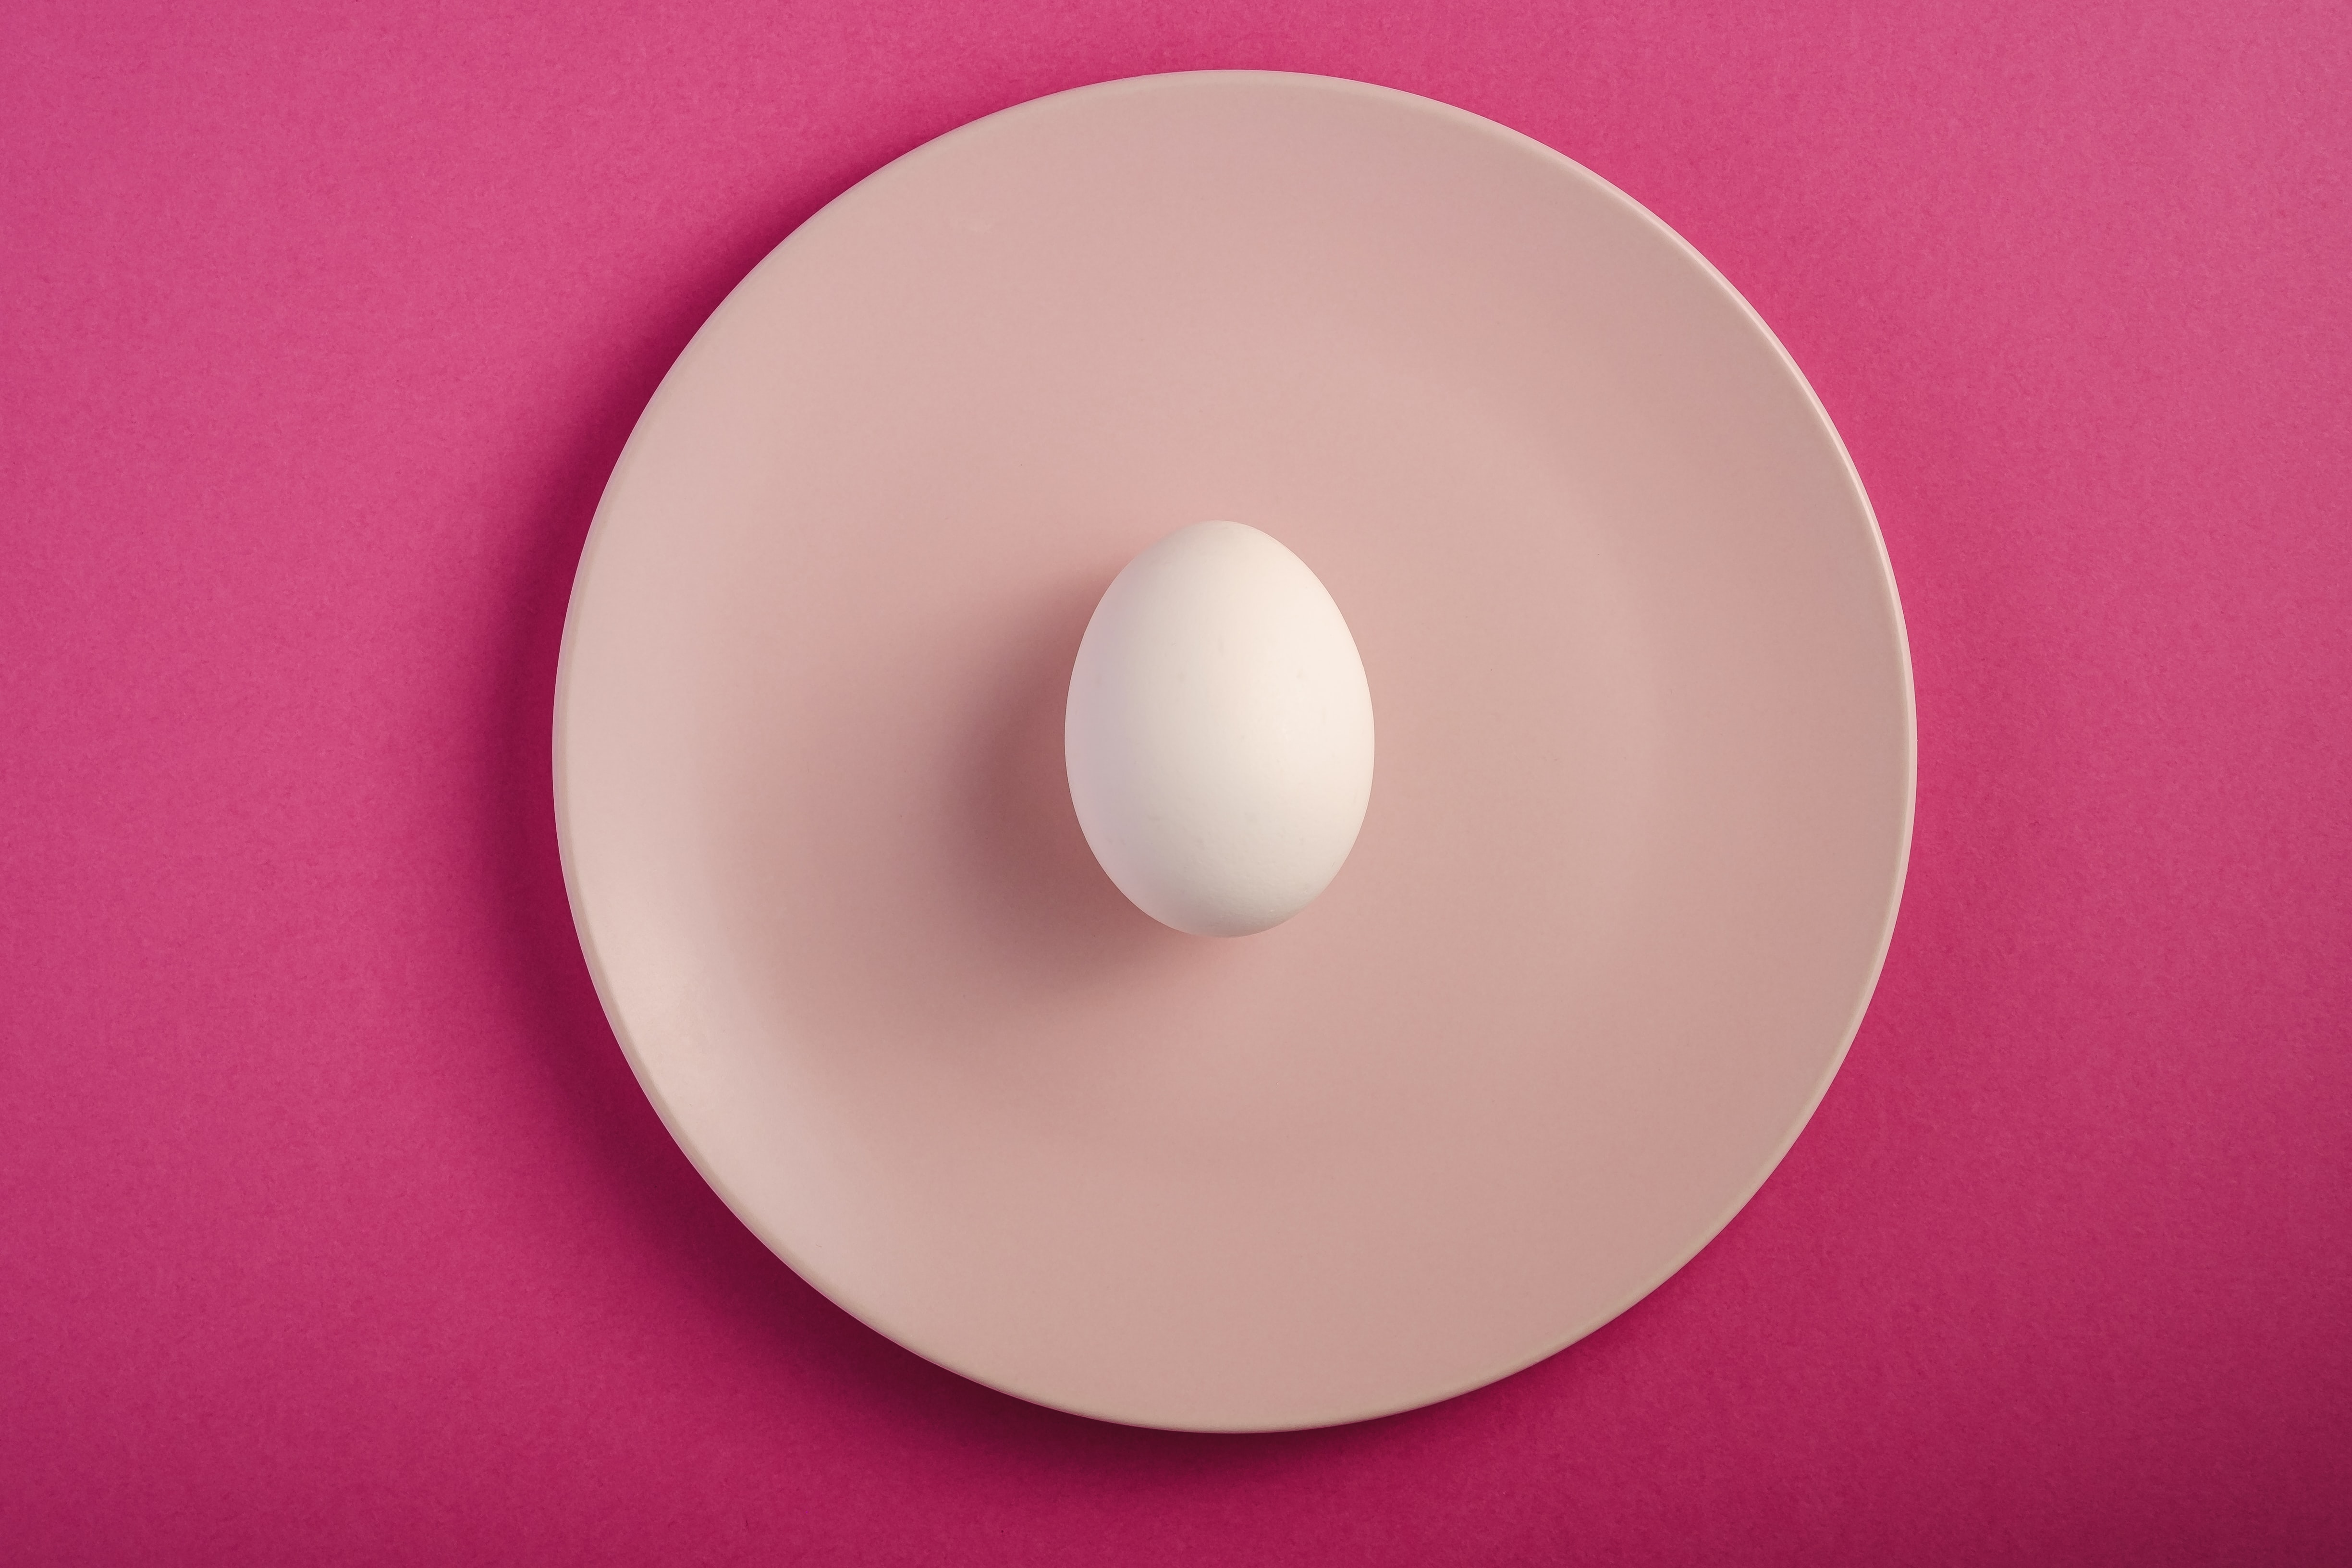 Egg in a plate by Rodion Kutsaev